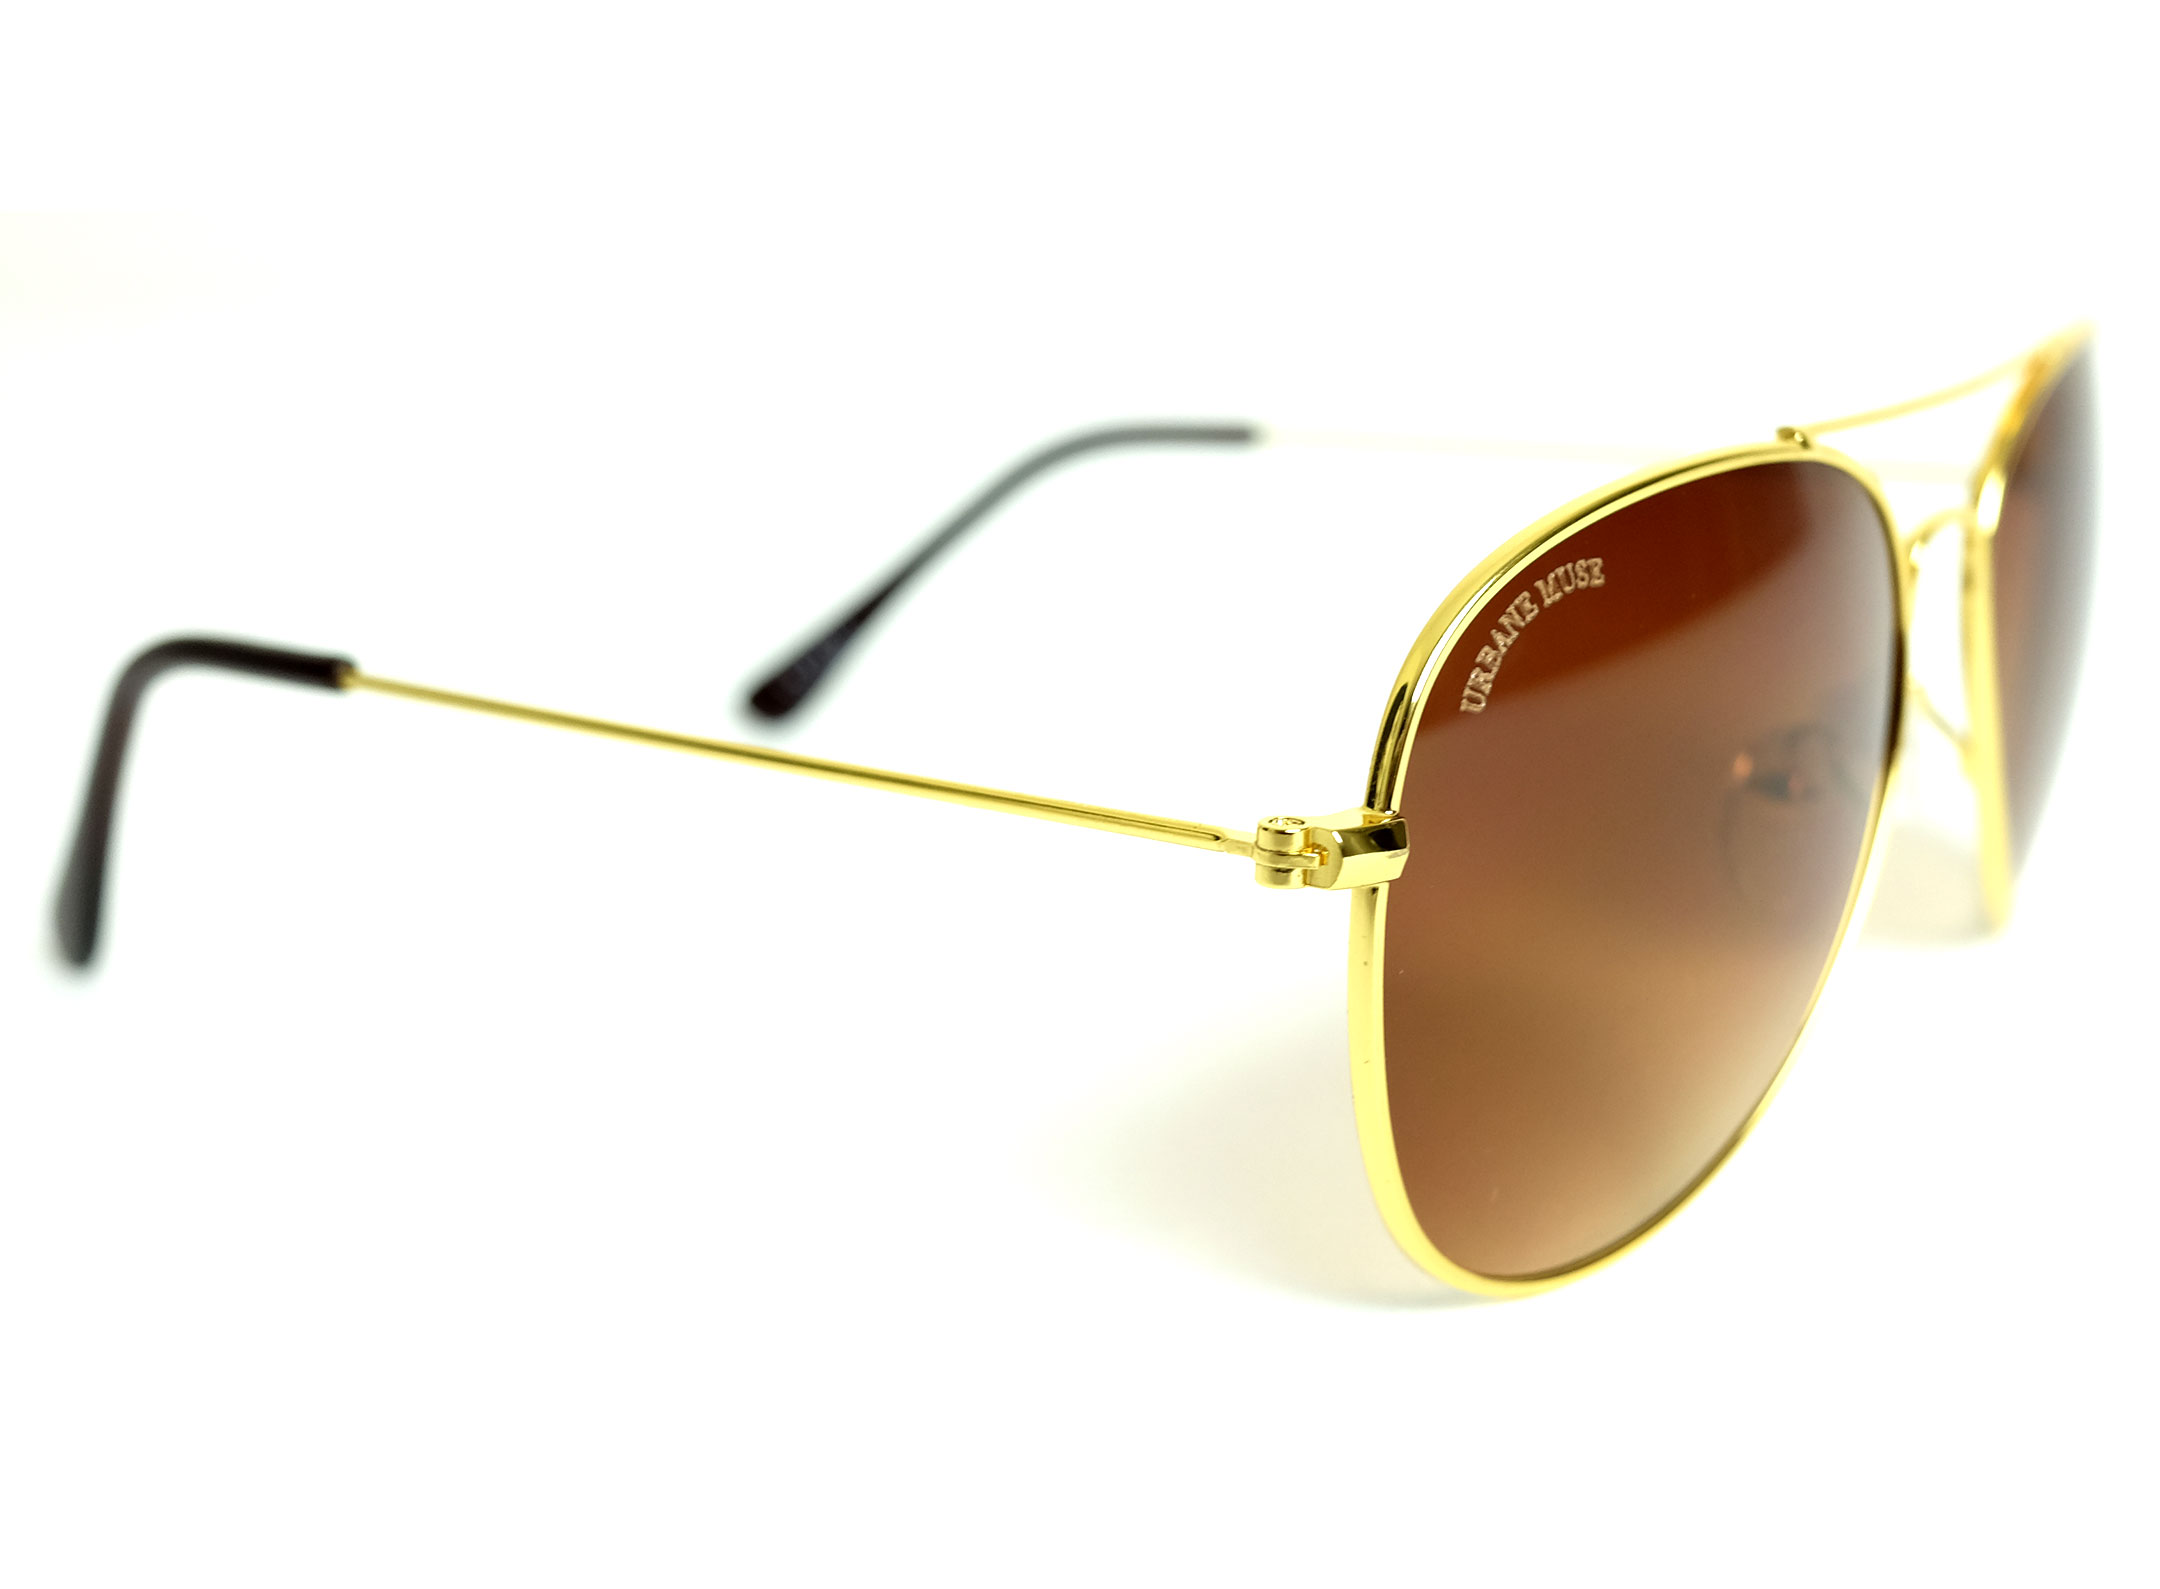 Gold Metal Frame Aviator Sunglasses with Gradient Brown - URBANE MUSE CHRIS  SMITH®